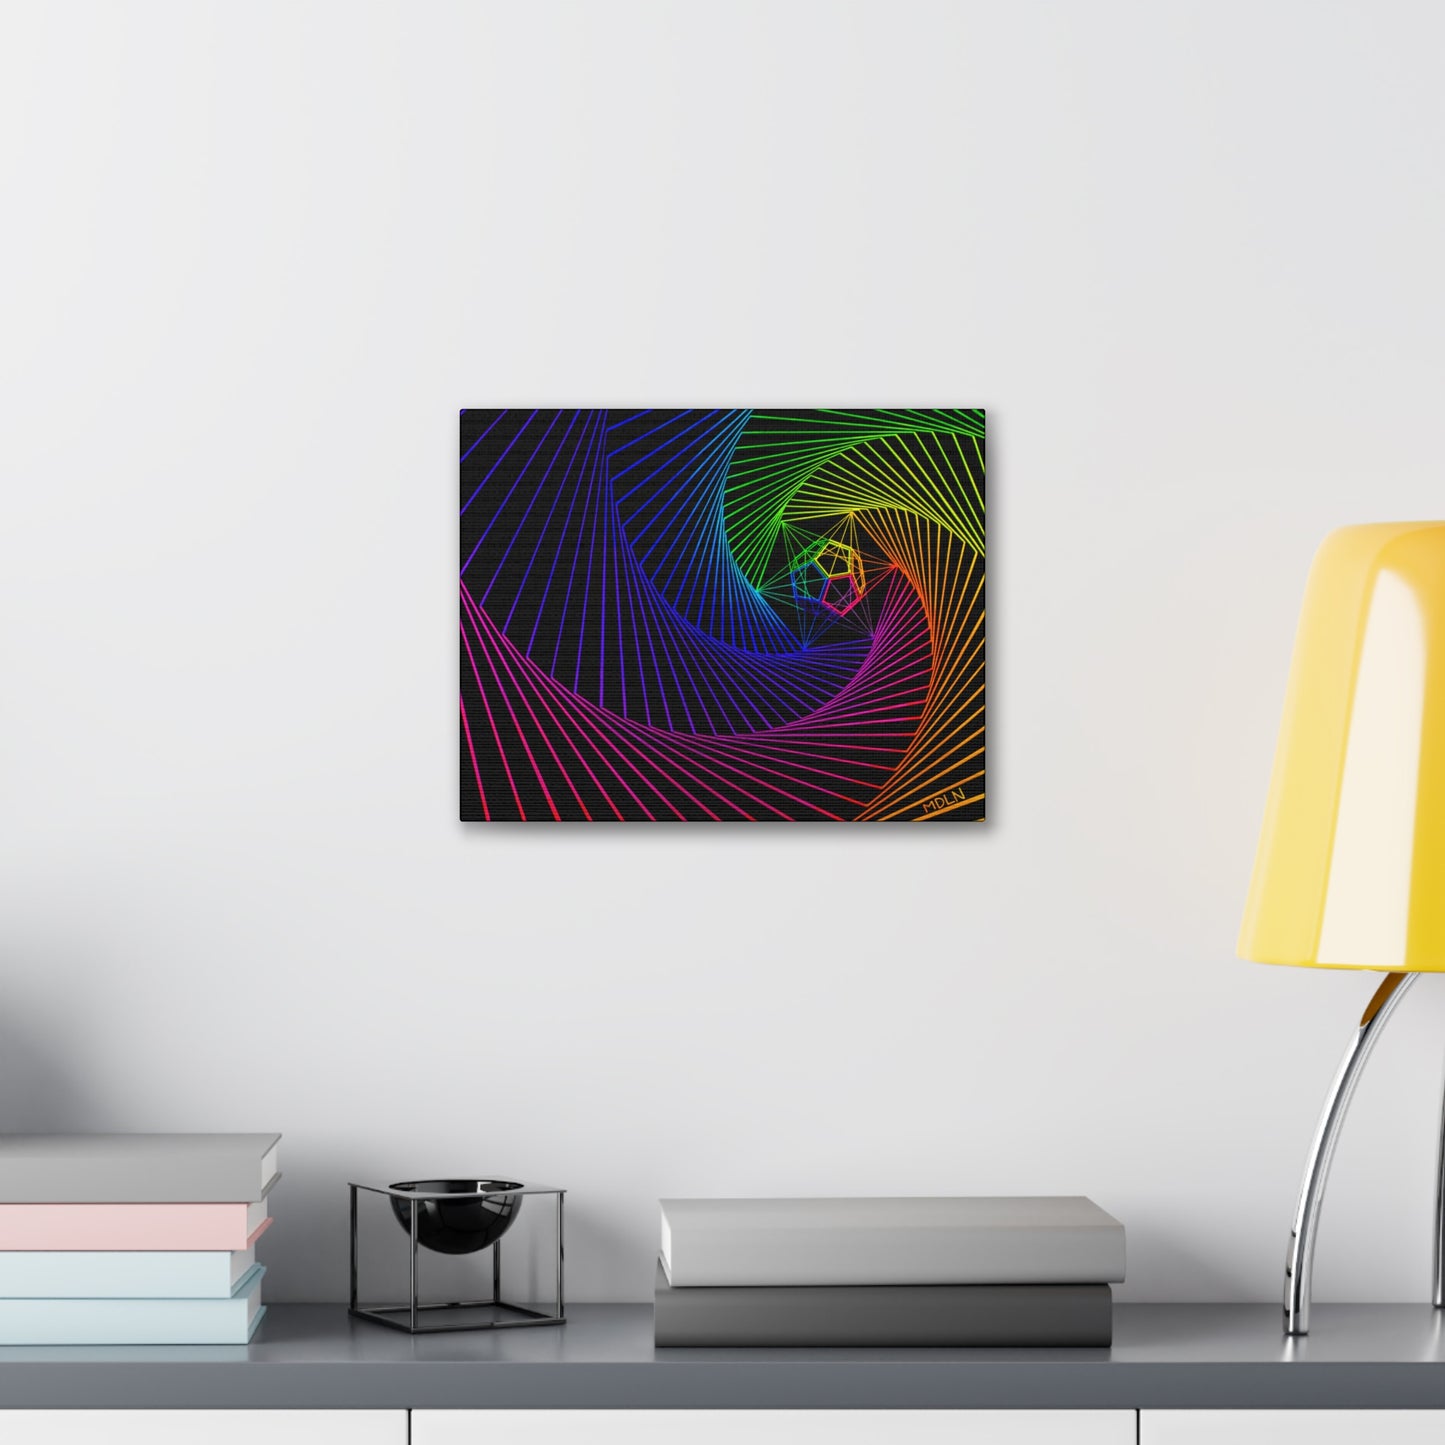 Sacred Geometry Art Canvas Art Print painting showing The Dodecahedron which represents The Aether, inside a spiral of lines all bright neon colors hanging on the wall over a desk